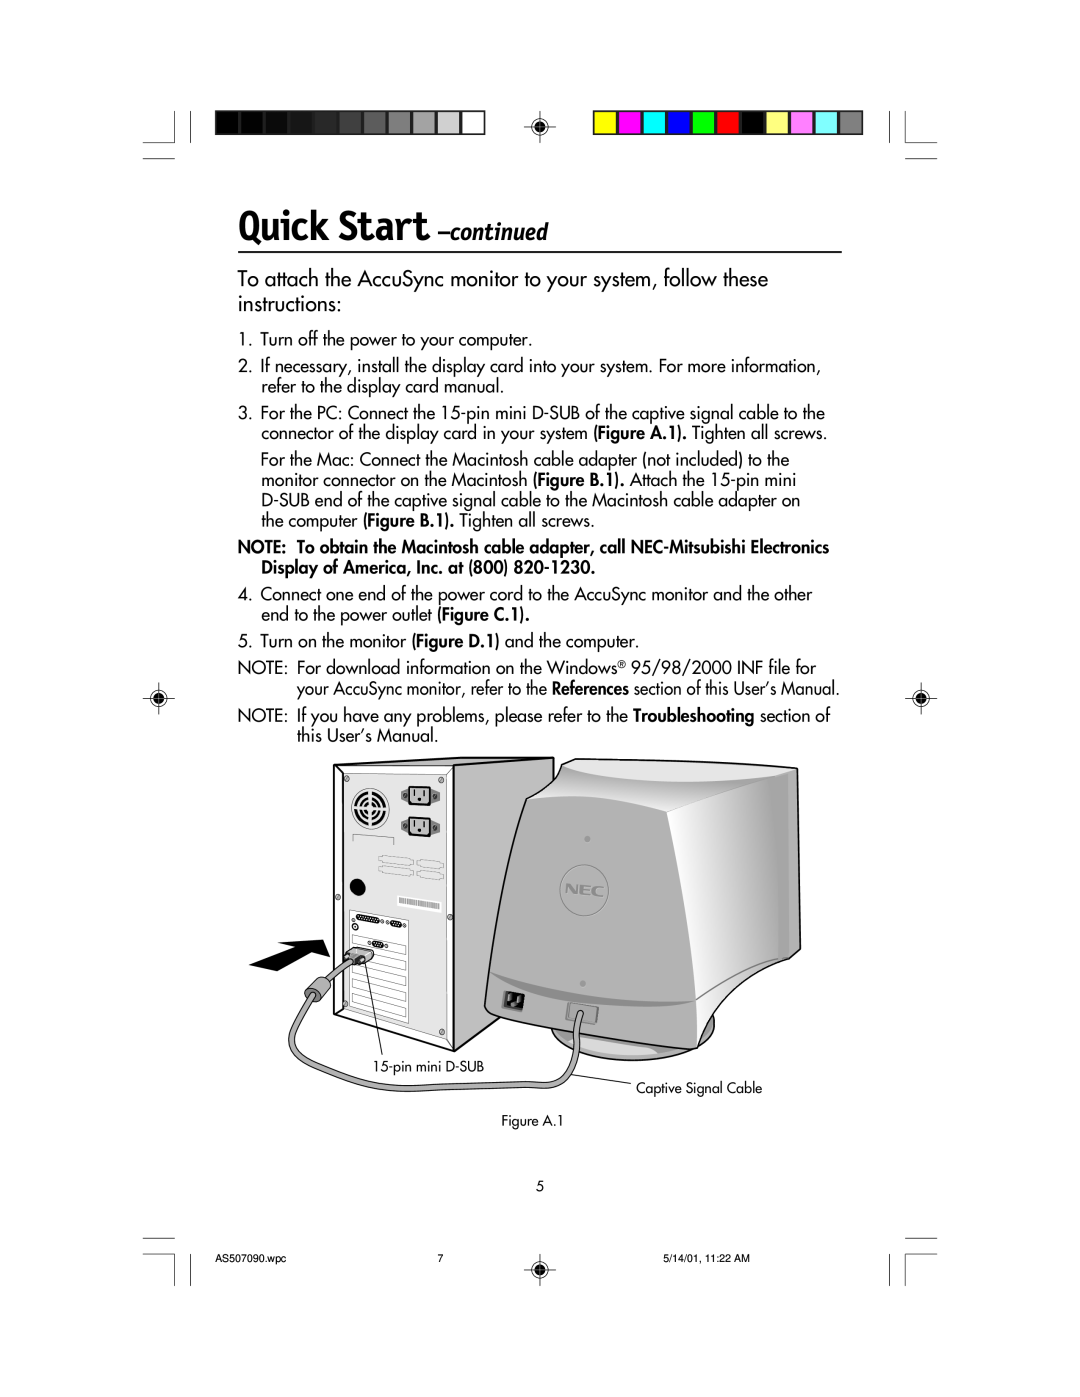 NEC AccuSync 70, AccuSync 90, AccuSync 50 user manual Quick Start -continued, Turn off the power to your computer 